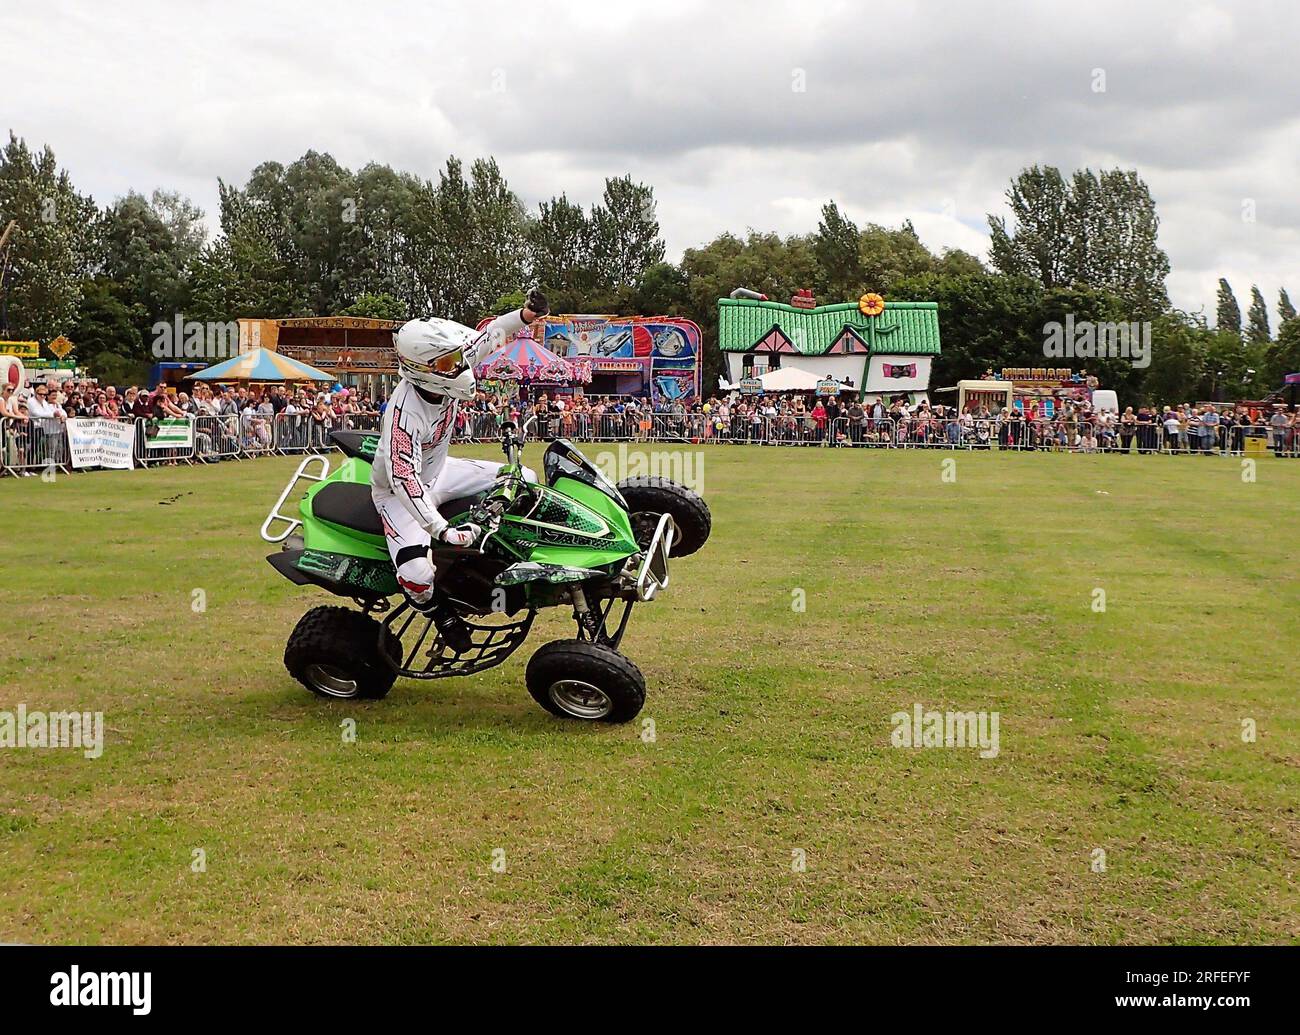 Rider pops a wheelie in Stunt Mania show at the Banbury & District Show in Spiceball Park, Banbury, UK Stock Photo